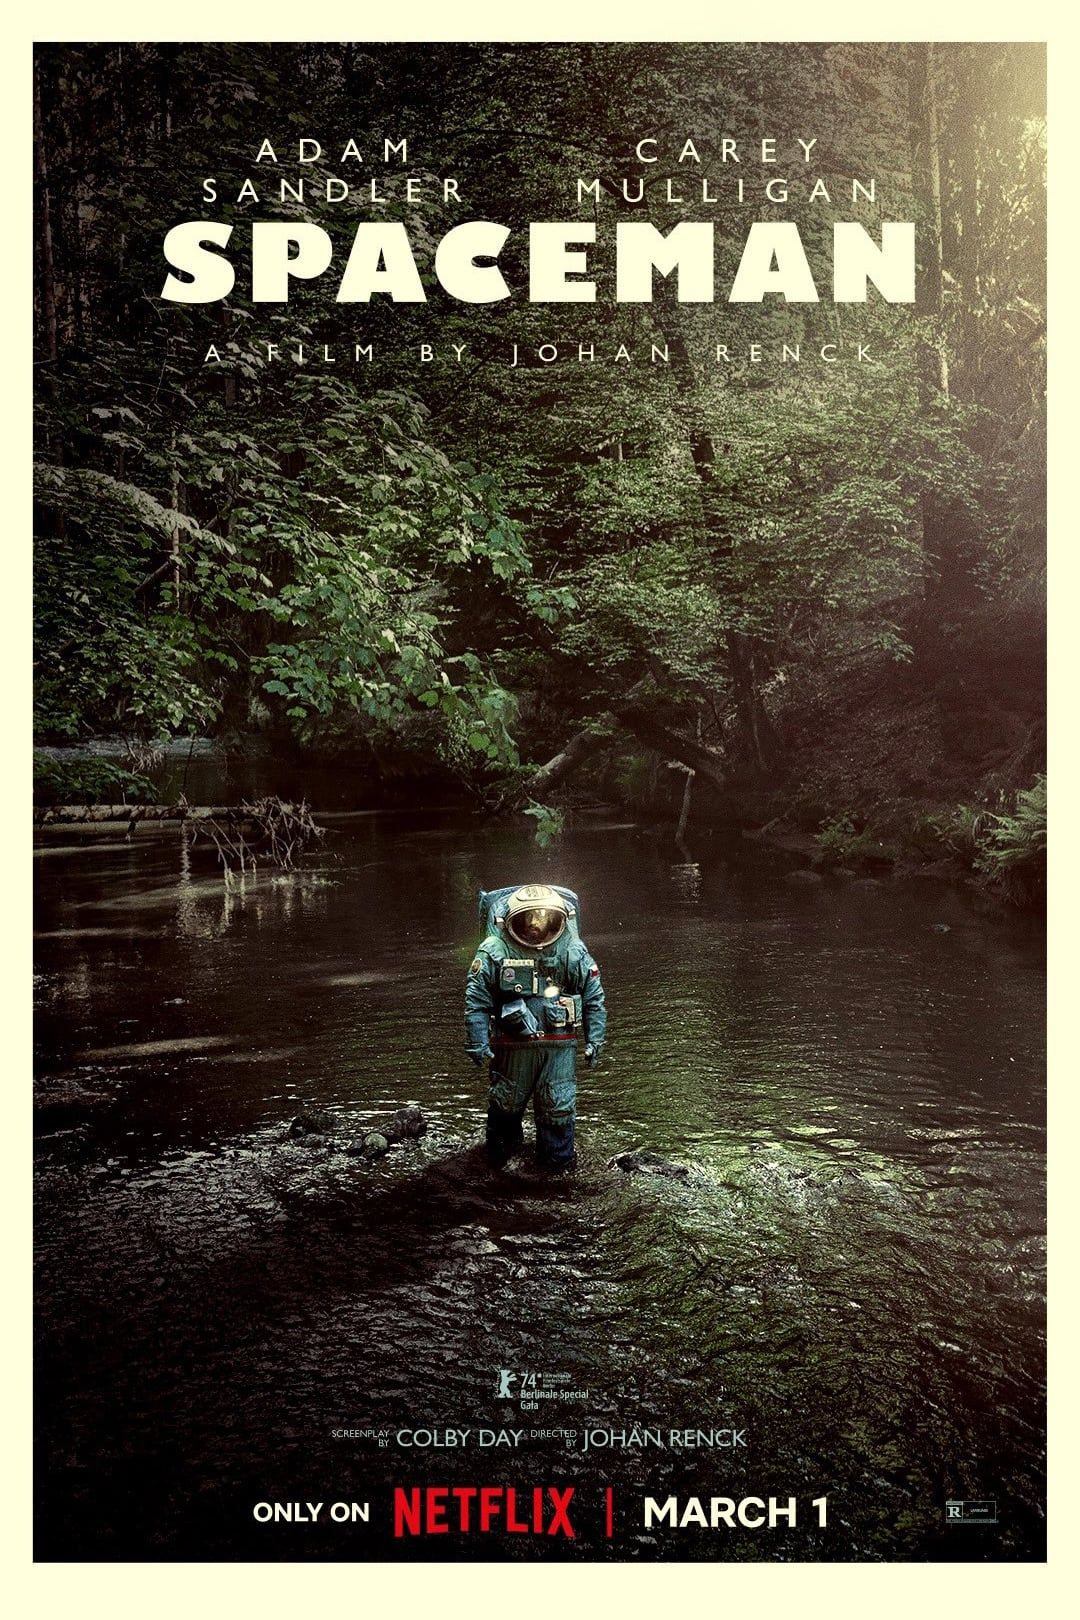 Spaceman Poster Showing Adam Sandler Walking Through a Forest in an Astronaut Suit